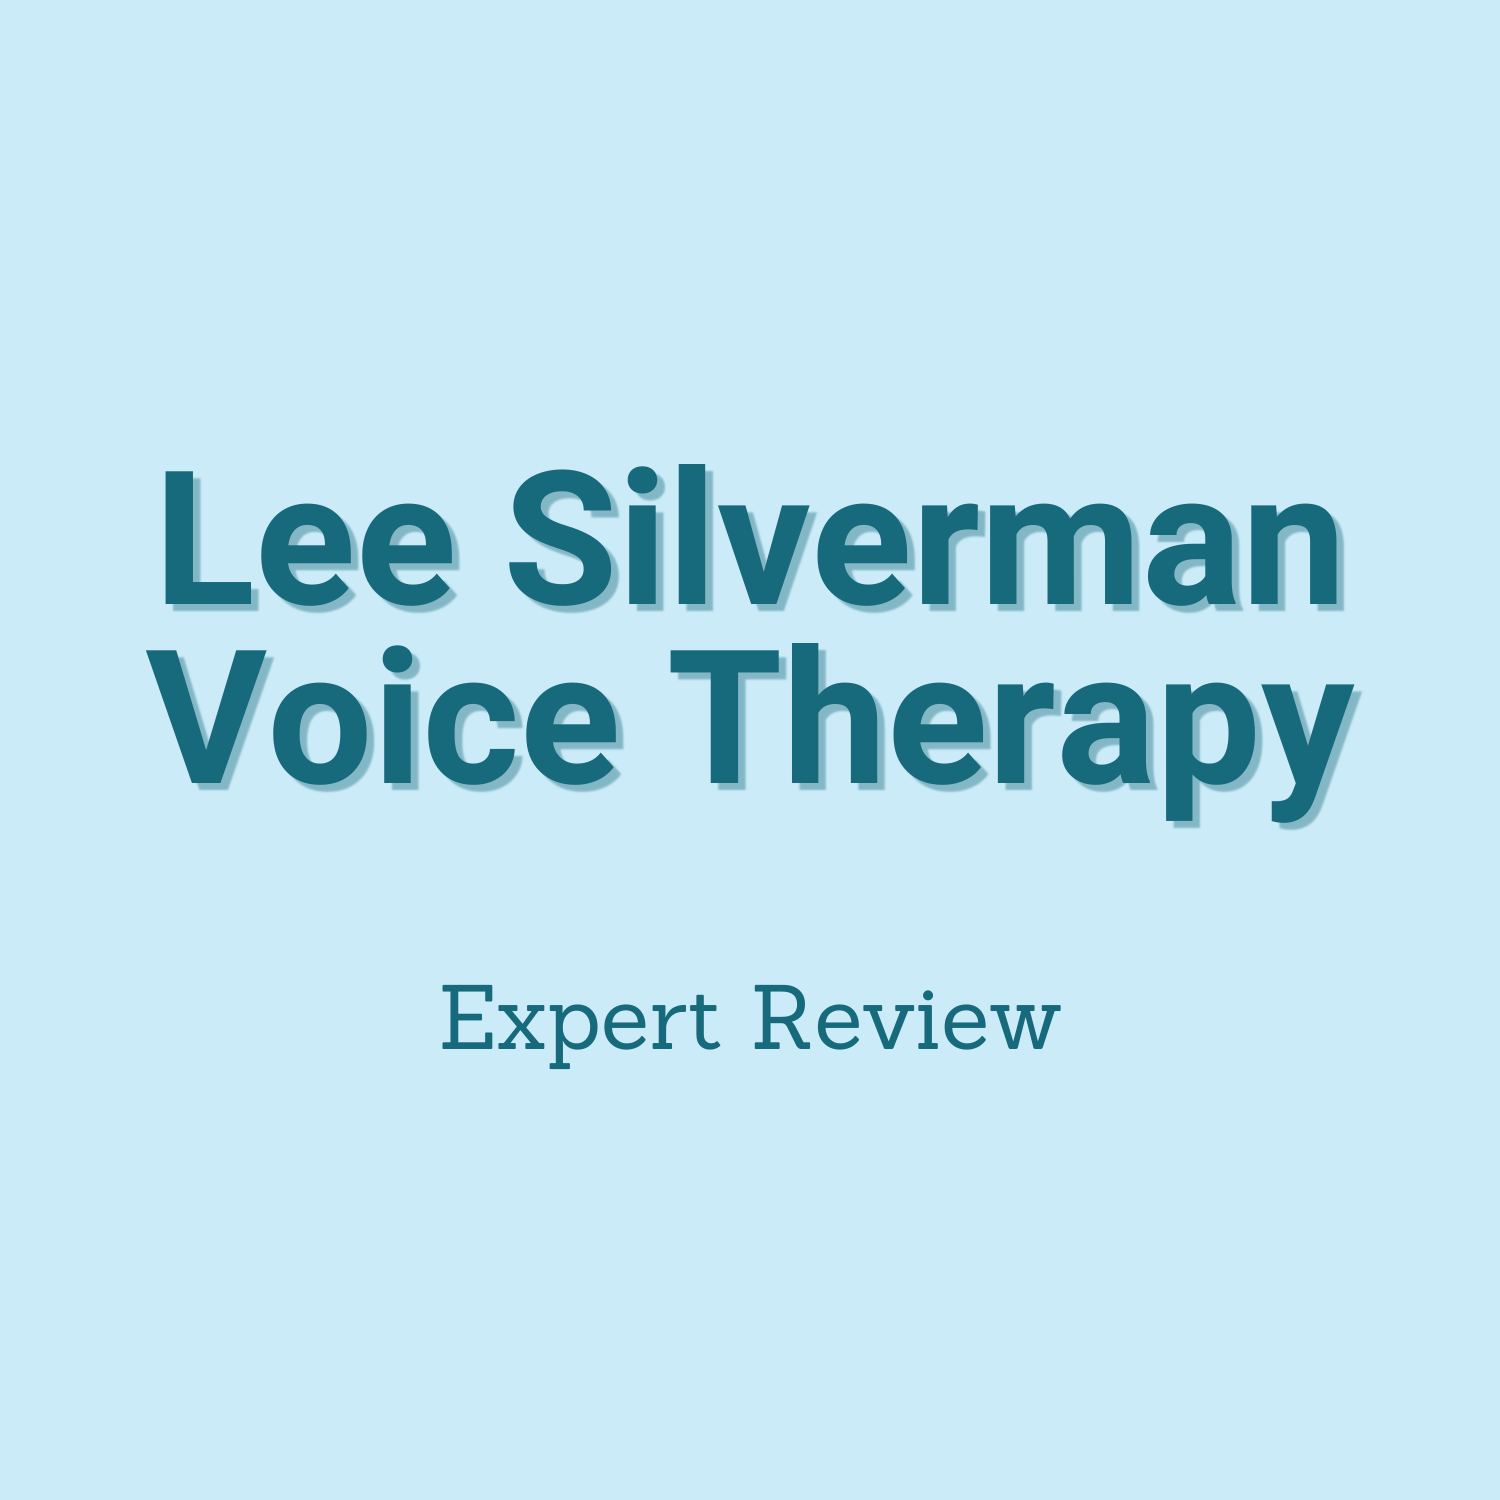 Lee Silverman Voice Therapy expert review